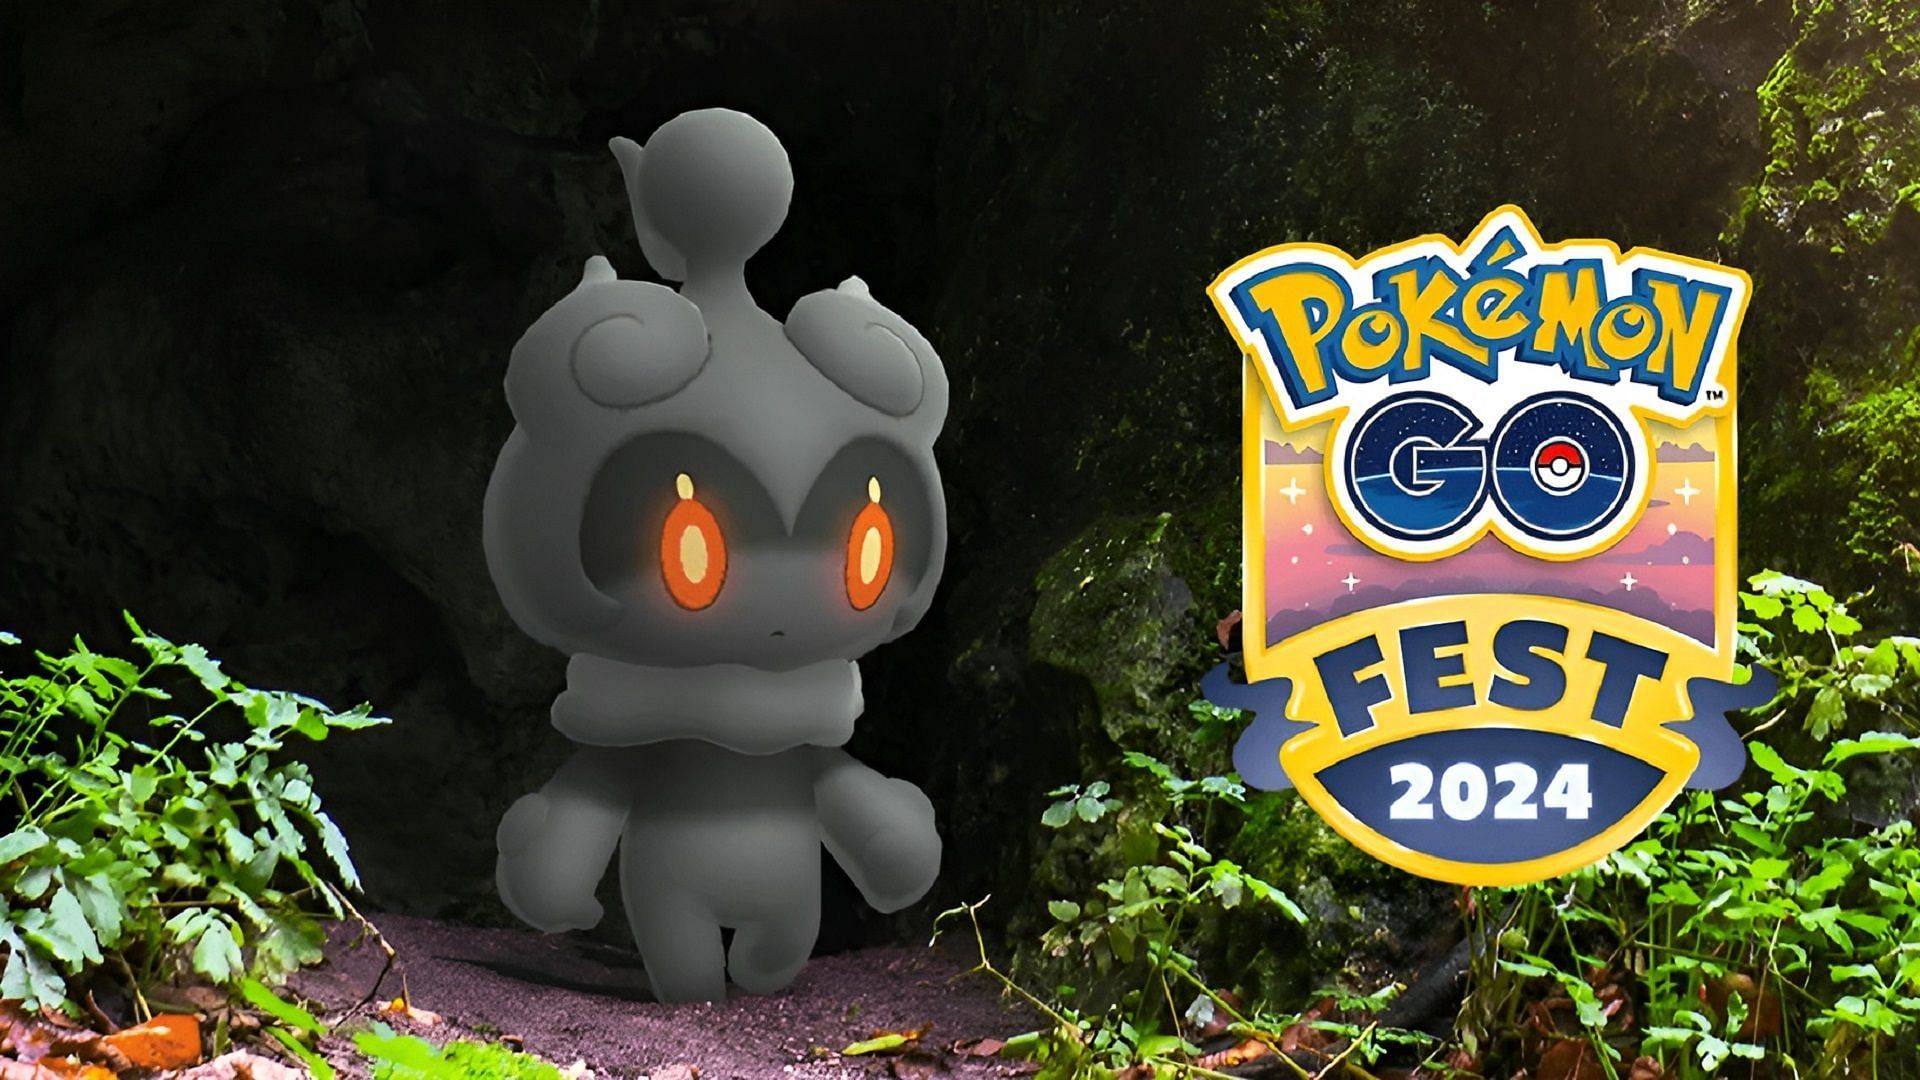 Marshadow will be available to players who purchase a Pokemon GO Fest 2024 Global ticket (Image via Niantic)